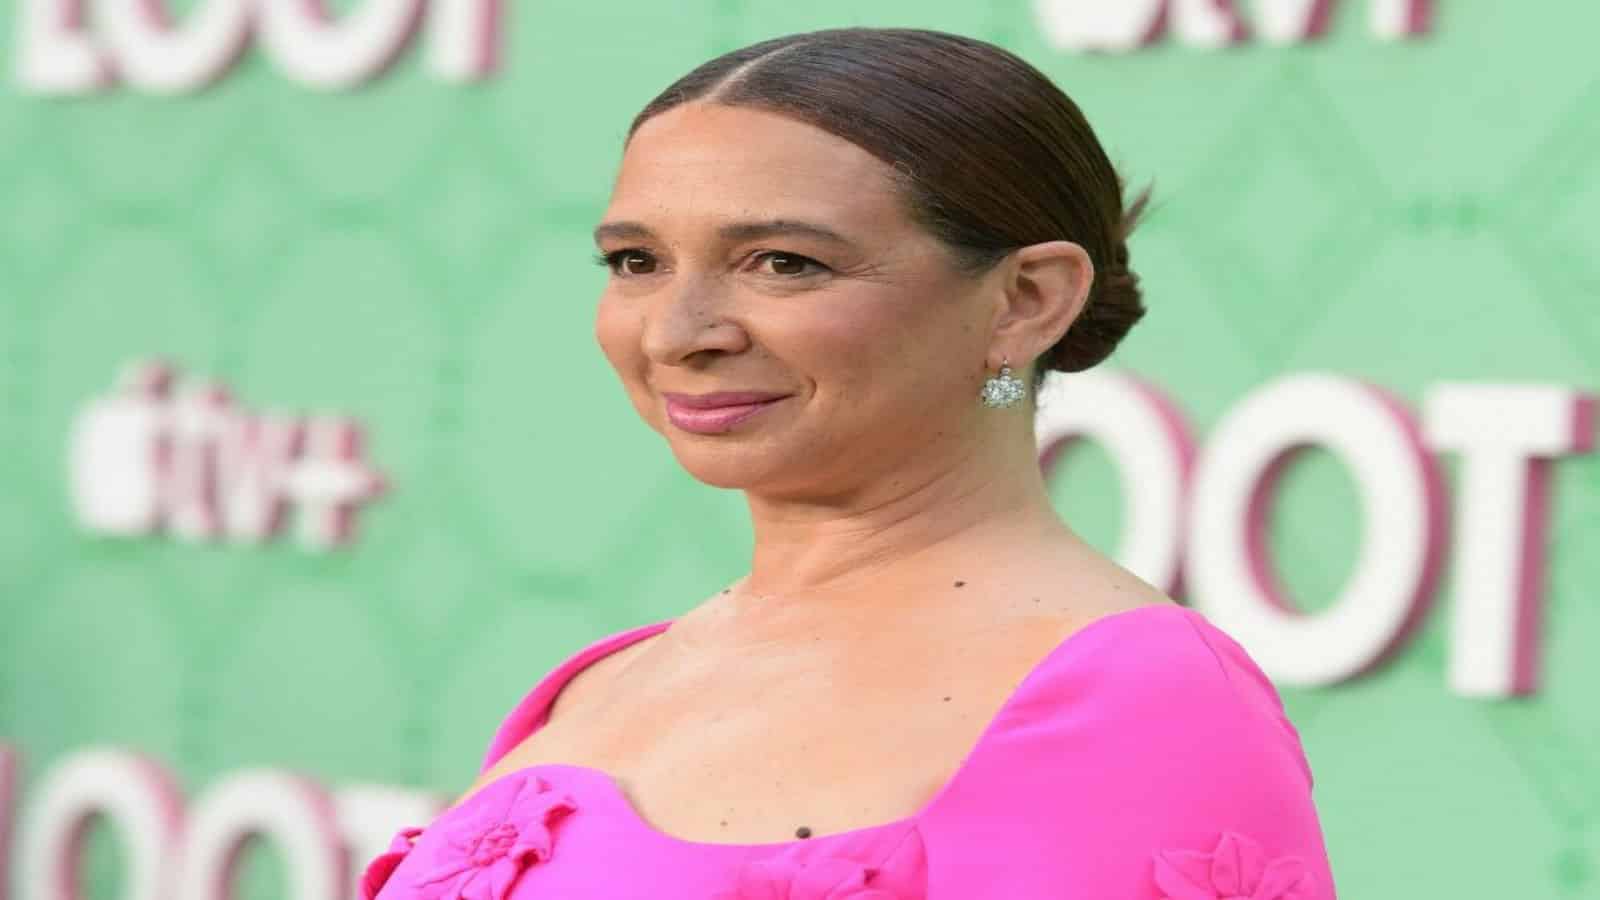 Maya Rudolph Weight Gain: Exploring her view on self acceptance